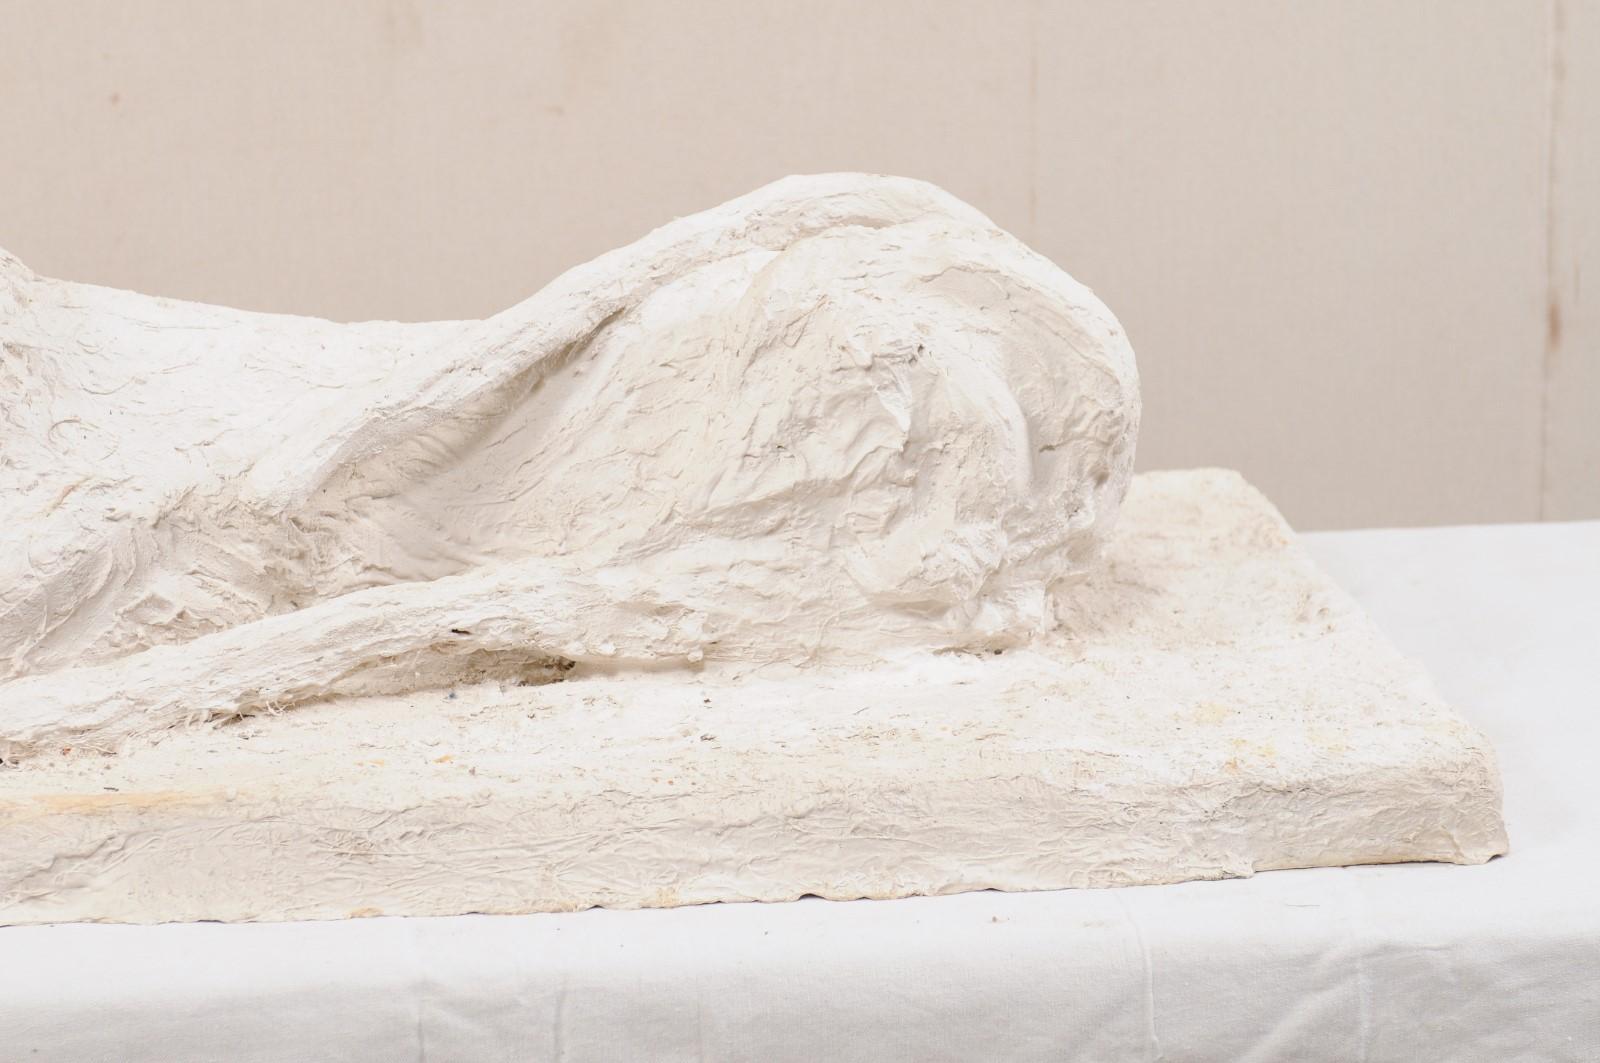 Contemporary Large-Scale Greyhound Dog Sculpture, French Artisan Created from Plaster